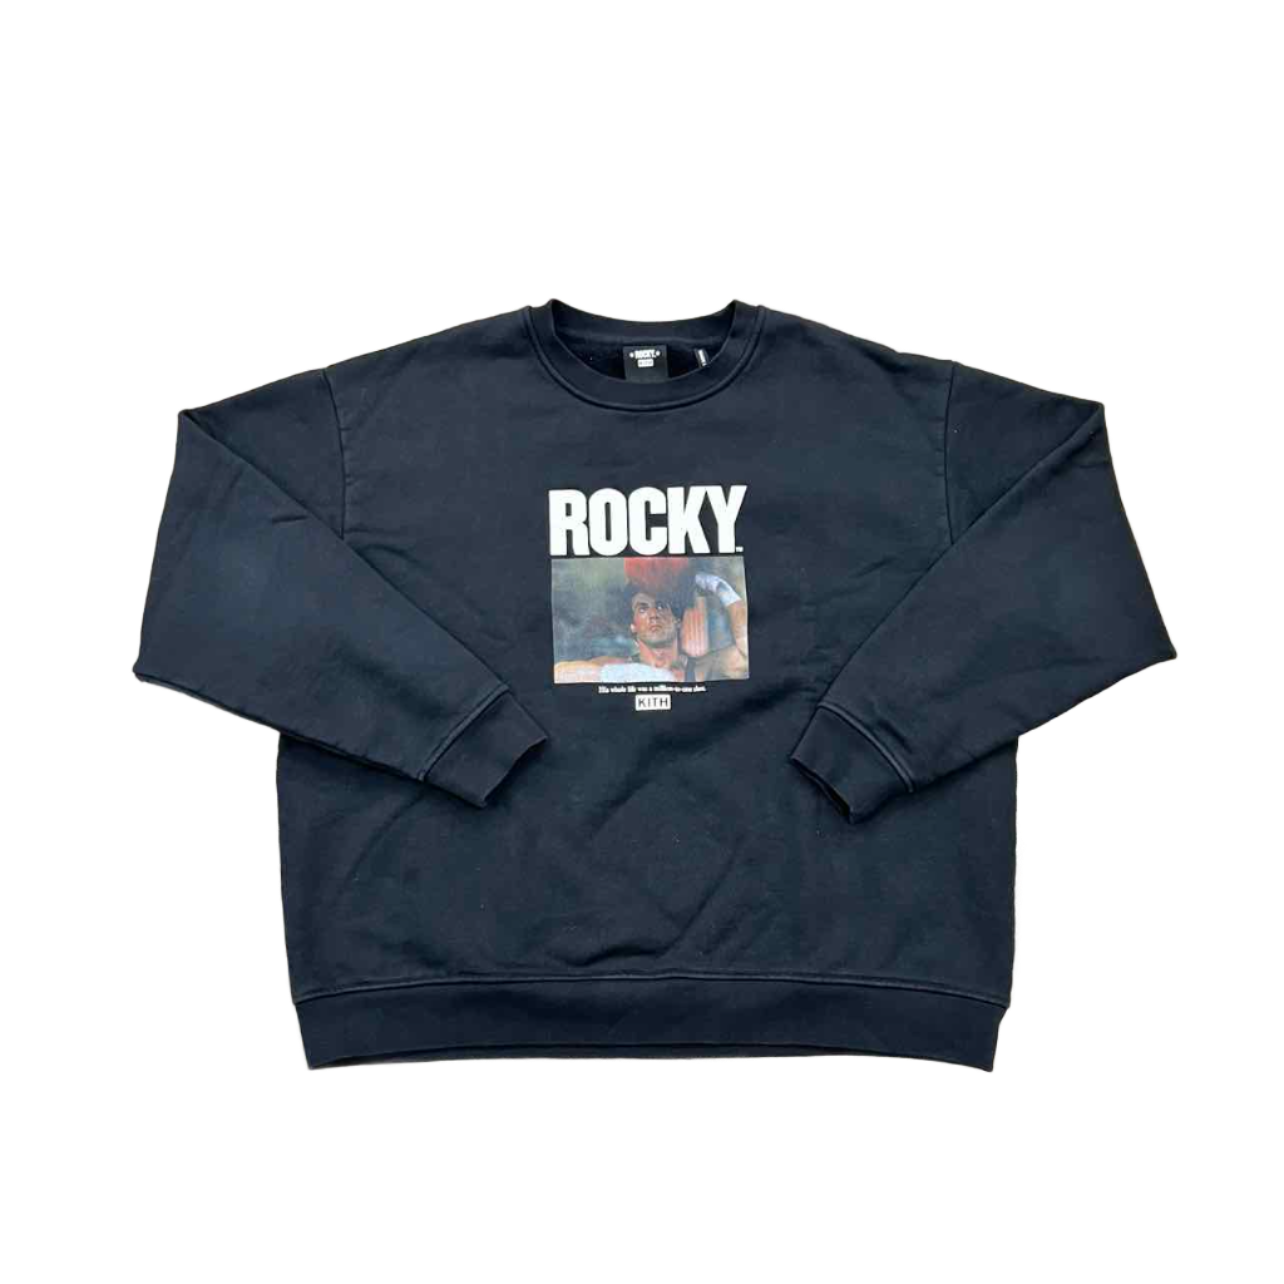 Kith Crewneck Sweater &quot;ROCKY MILLION TO ONE&quot; Black Used Size 2XL